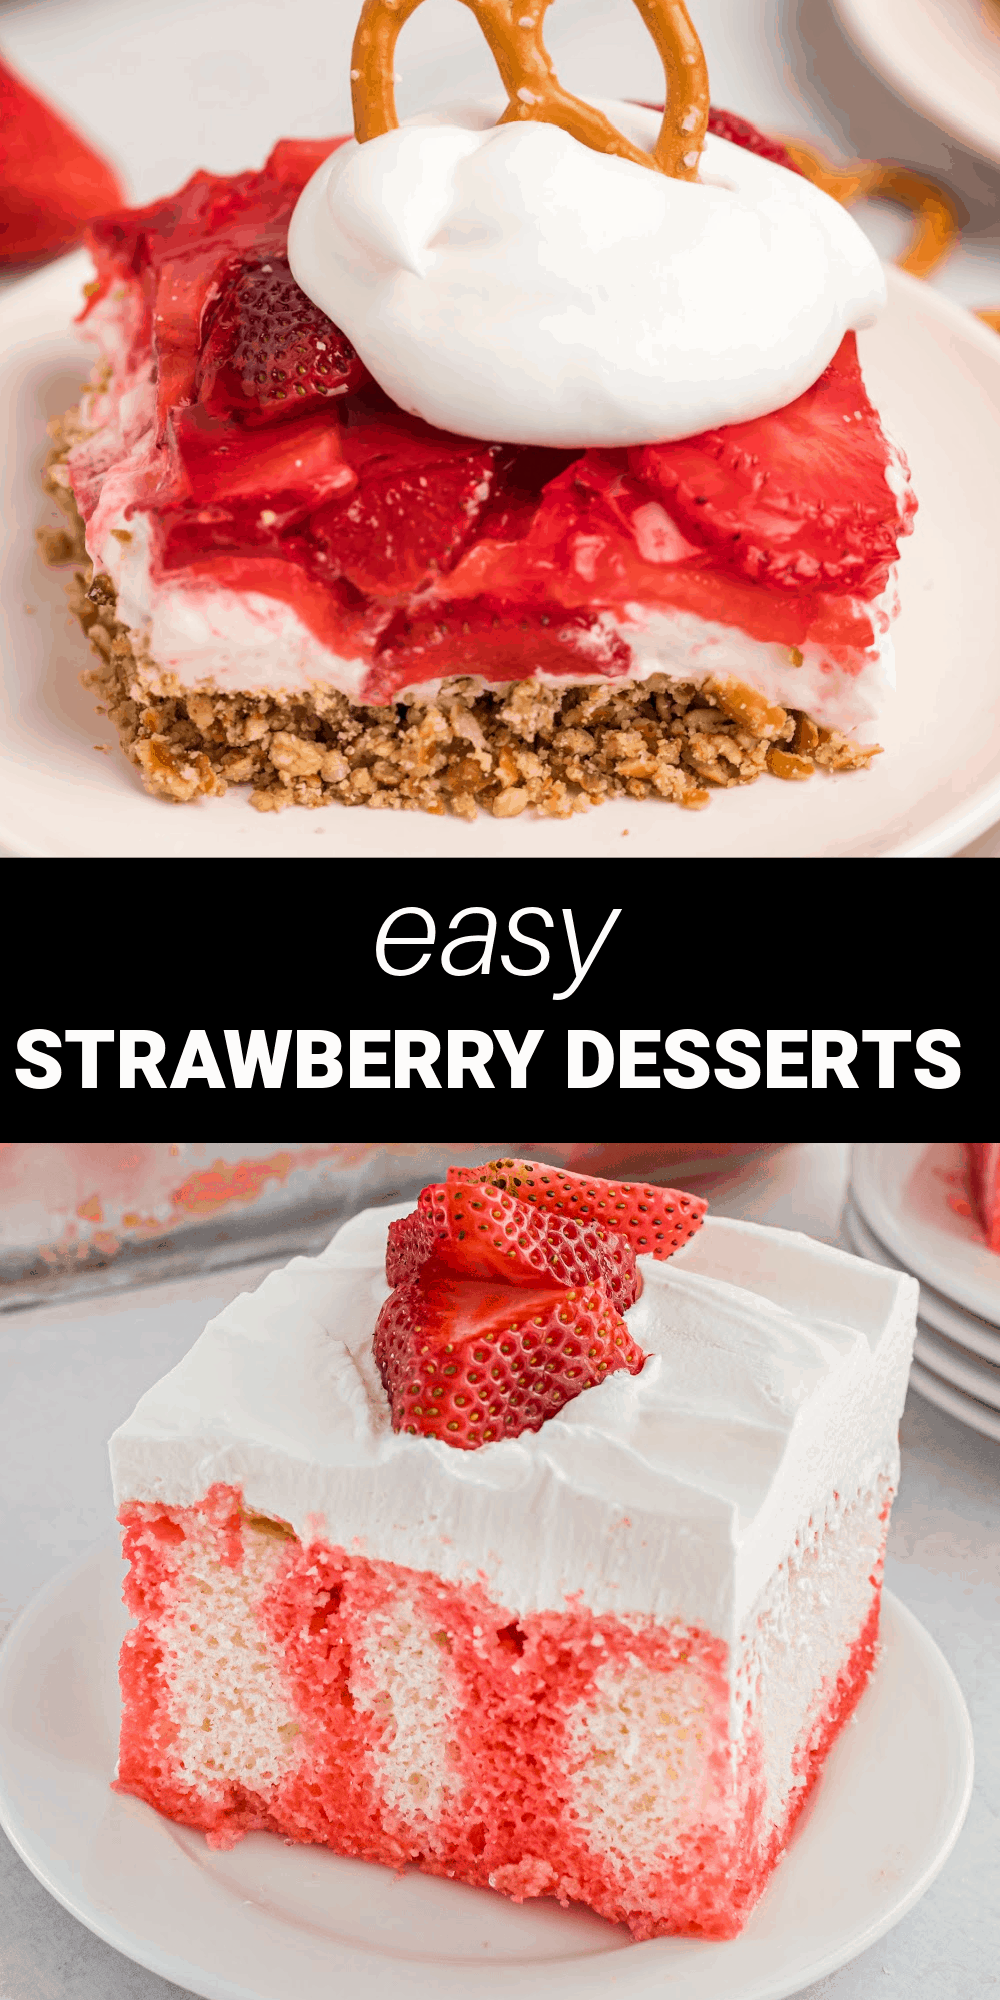 Lighten up your dessert routine with these easy desserts with strawberries bursting with fresh berry flavors! It's the perfect way to celebrate spring and summer!